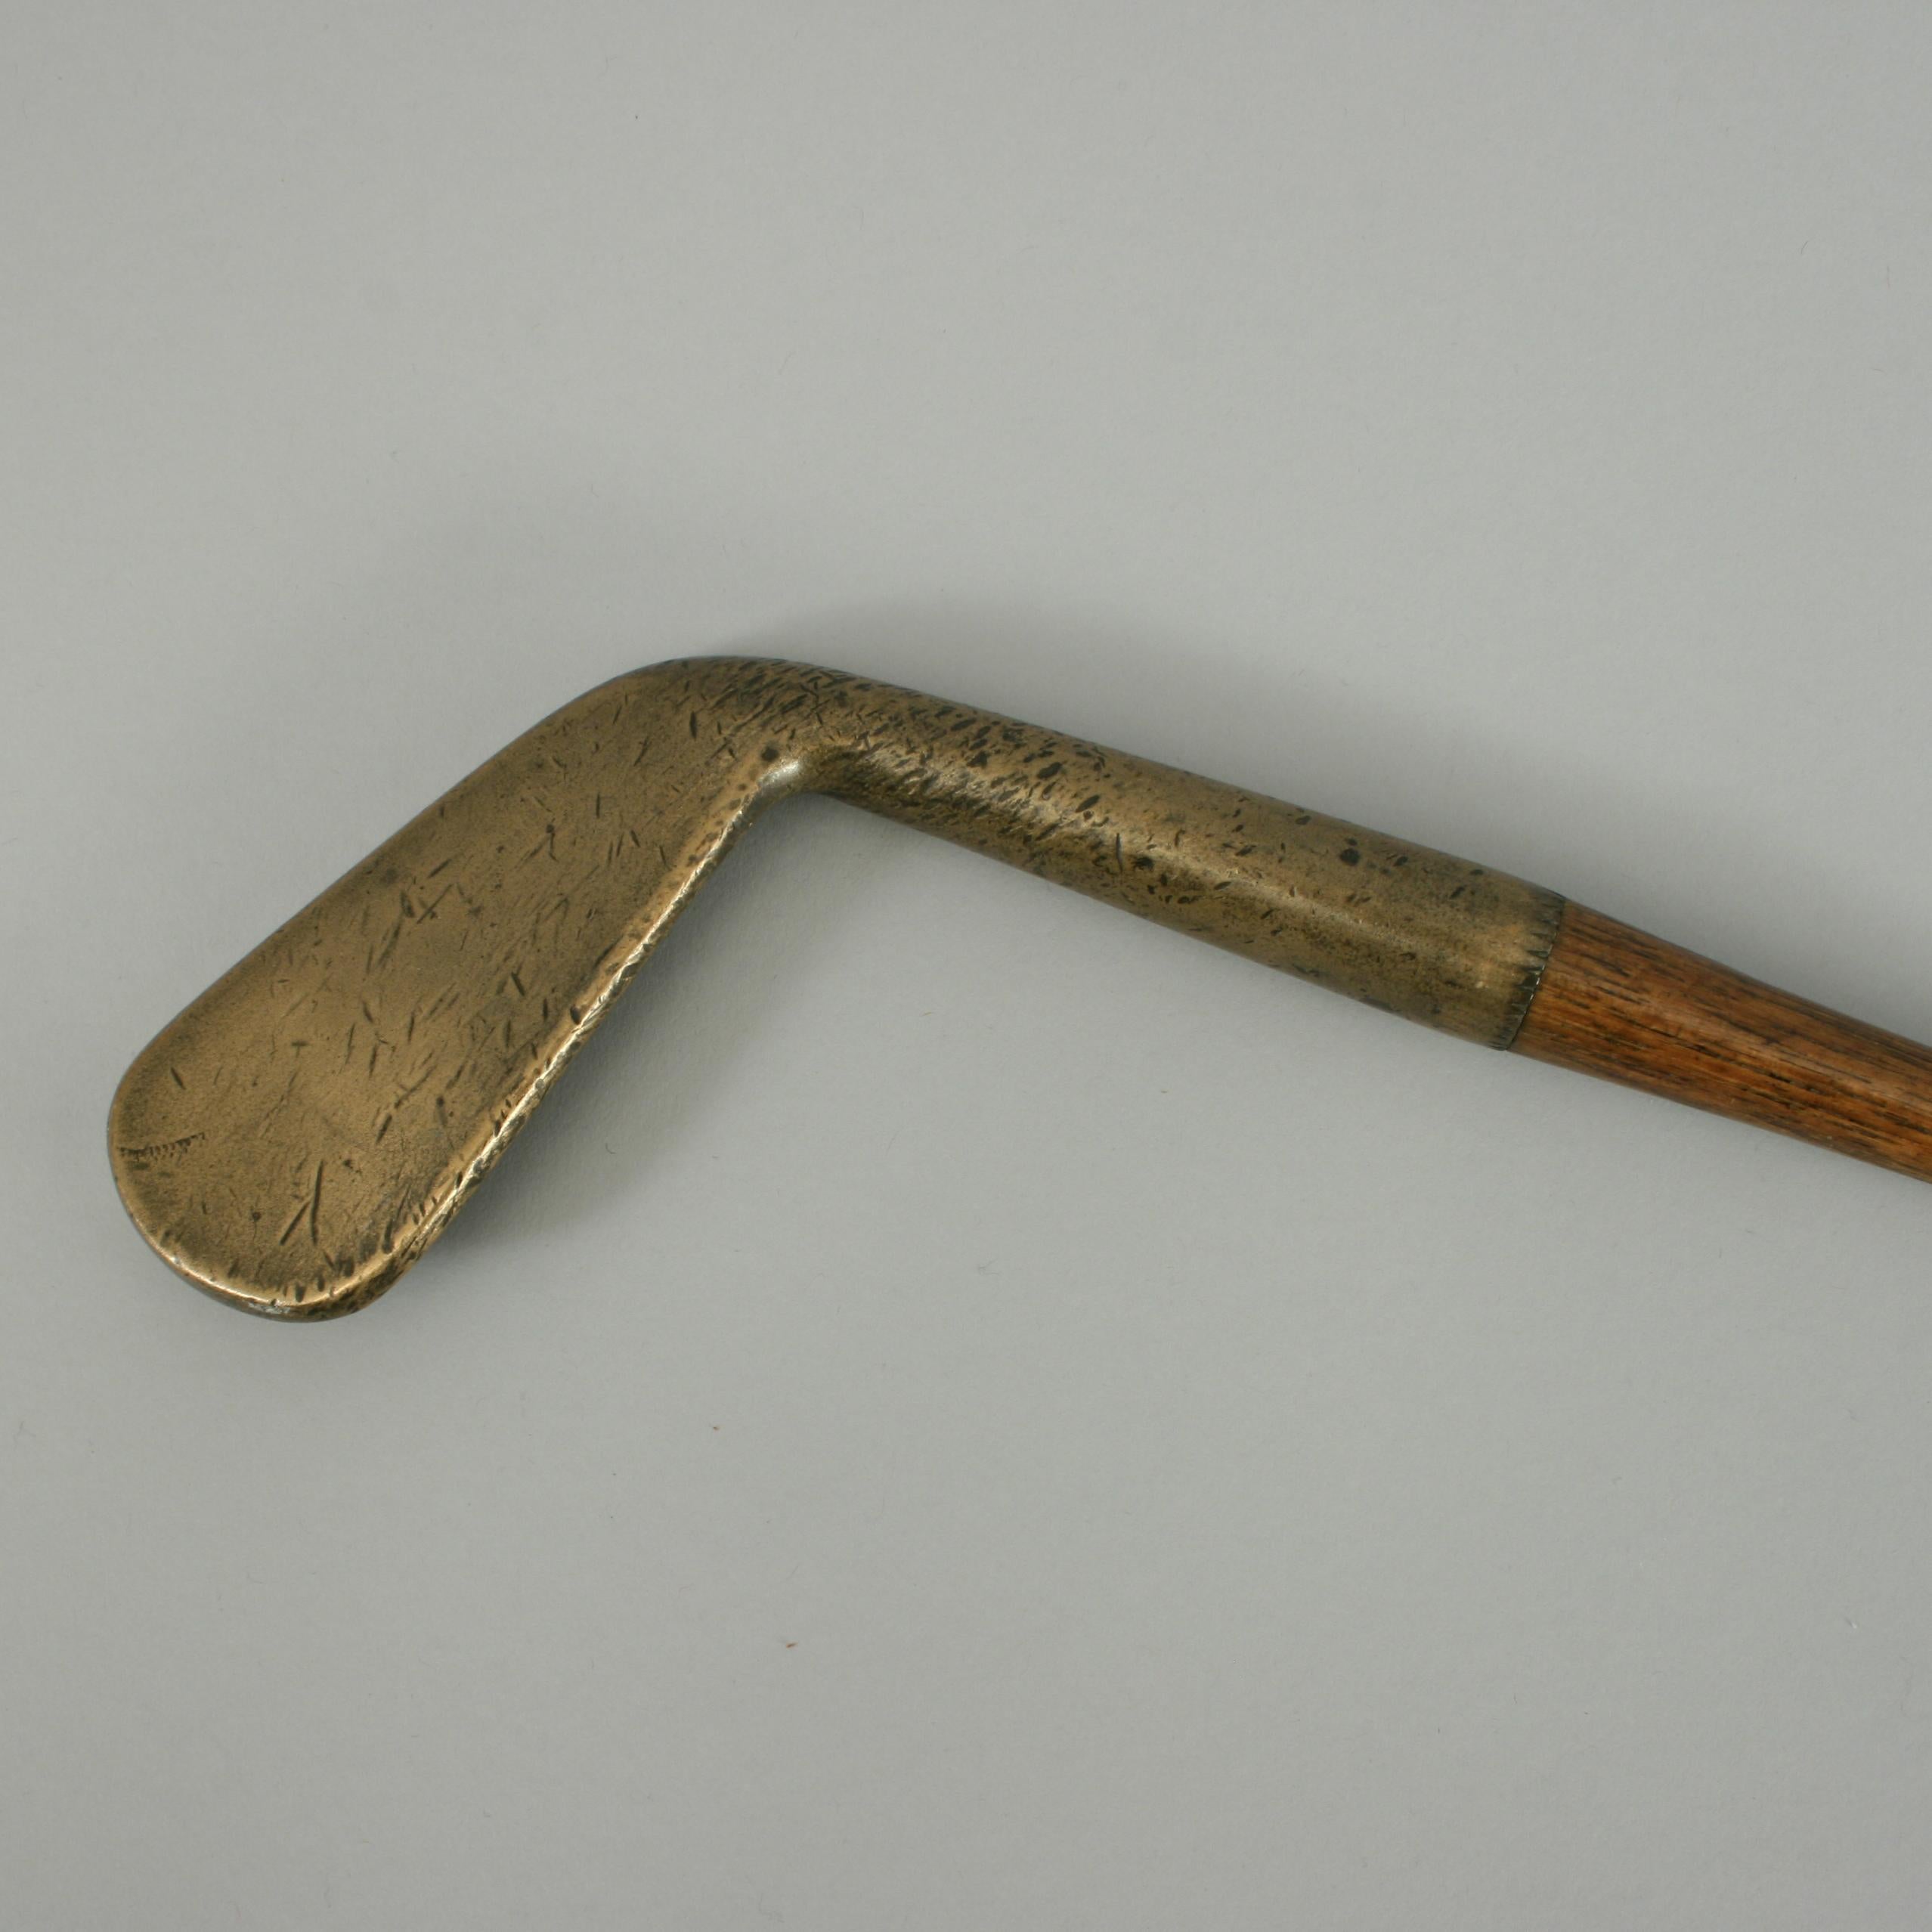 Antique hickory golf club iron, bronze head.
A good bronze (gun metal) head golf club, known as a lofting iron. The IDEA of a lofting iron is to elevate the ball on approach shots. The iron is smooth faced with a very slight concave face to it. The